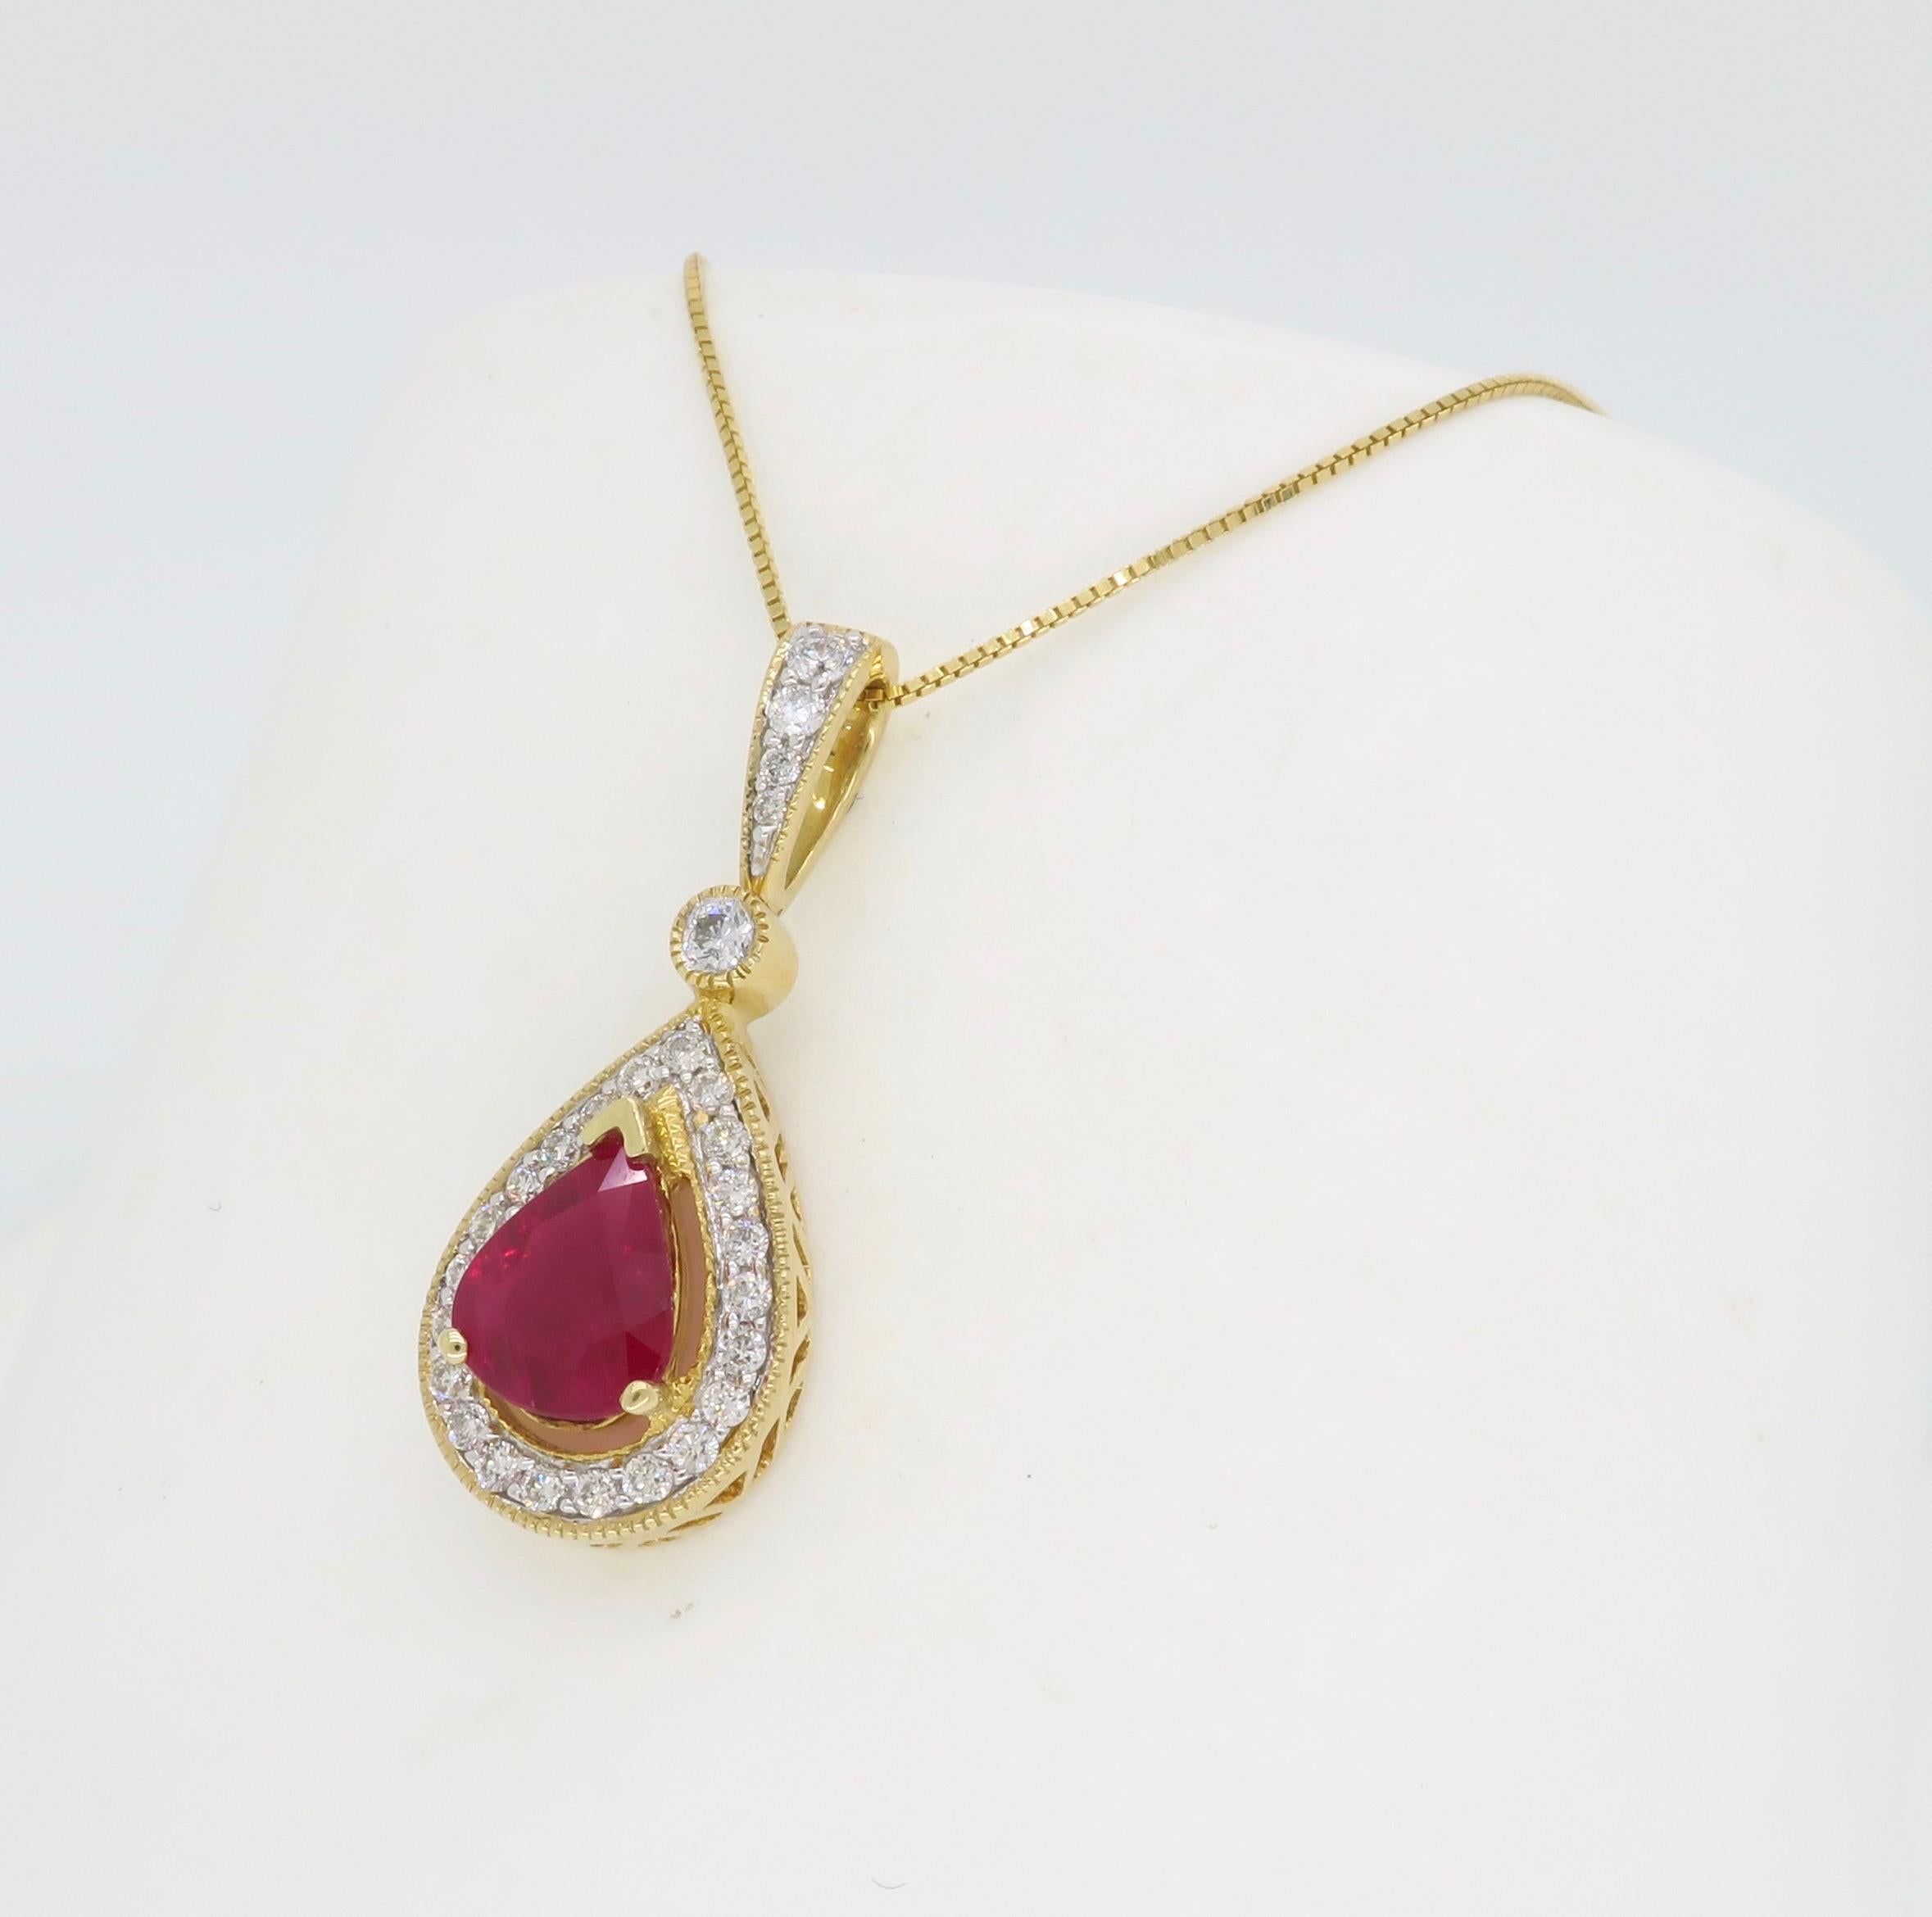 Pear shaped ruby and diamond pendant necklace crafted in 14k yellow gold. 

Gemstone: Ruby & Diamond
Gemstone Carat Weight: Approximately 1.10CT
Diamond Carat Weight: .23CTW
Diamond Cut: Round Brilliant Cut Diamonds
Color: Average G-I
Clarity: